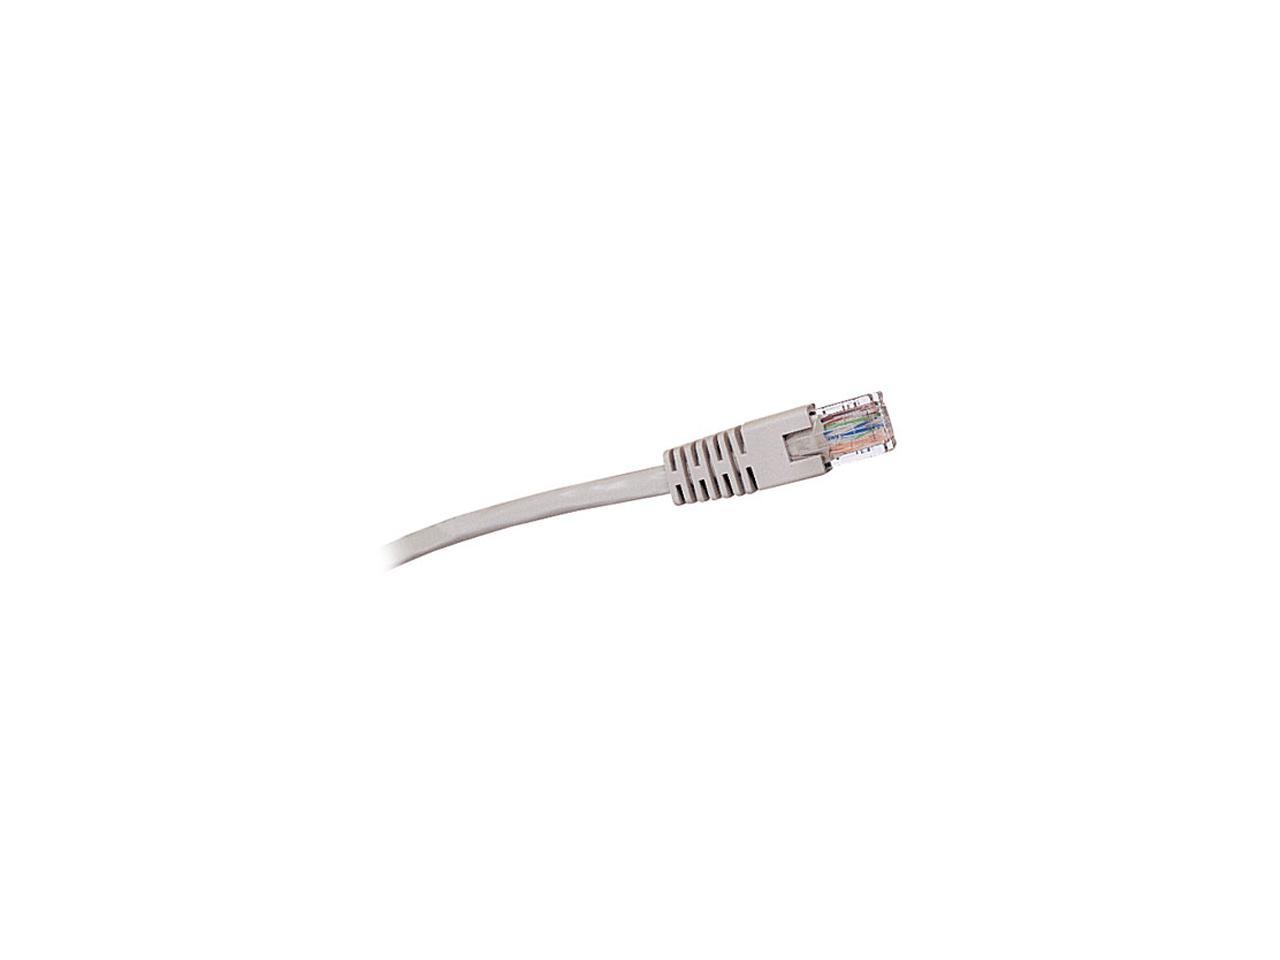 TRIPP LITE N002-025-GY 25 ft. Cat 5E Gray Cat5e 350MHz Gray Patch Cable